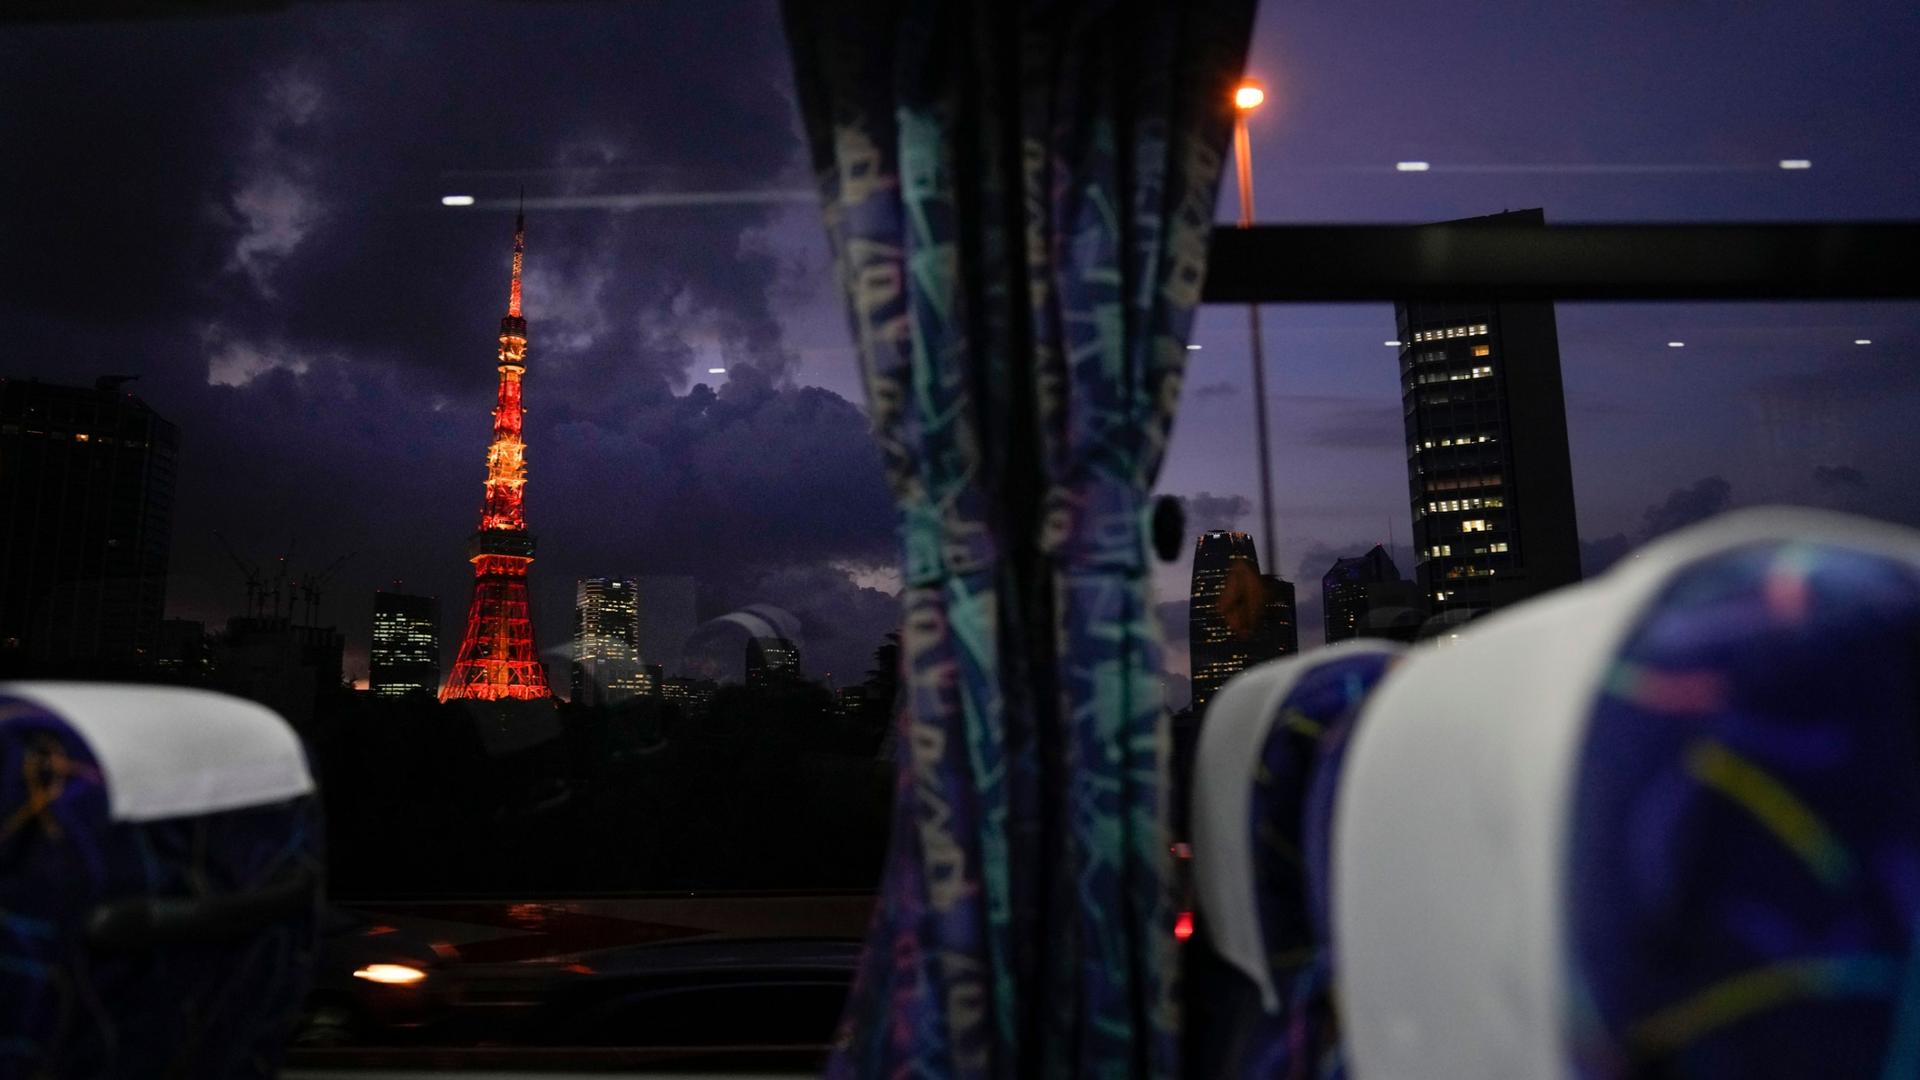 The Tokyo Tower is shown in the distance illuminated with red and orange lighting.